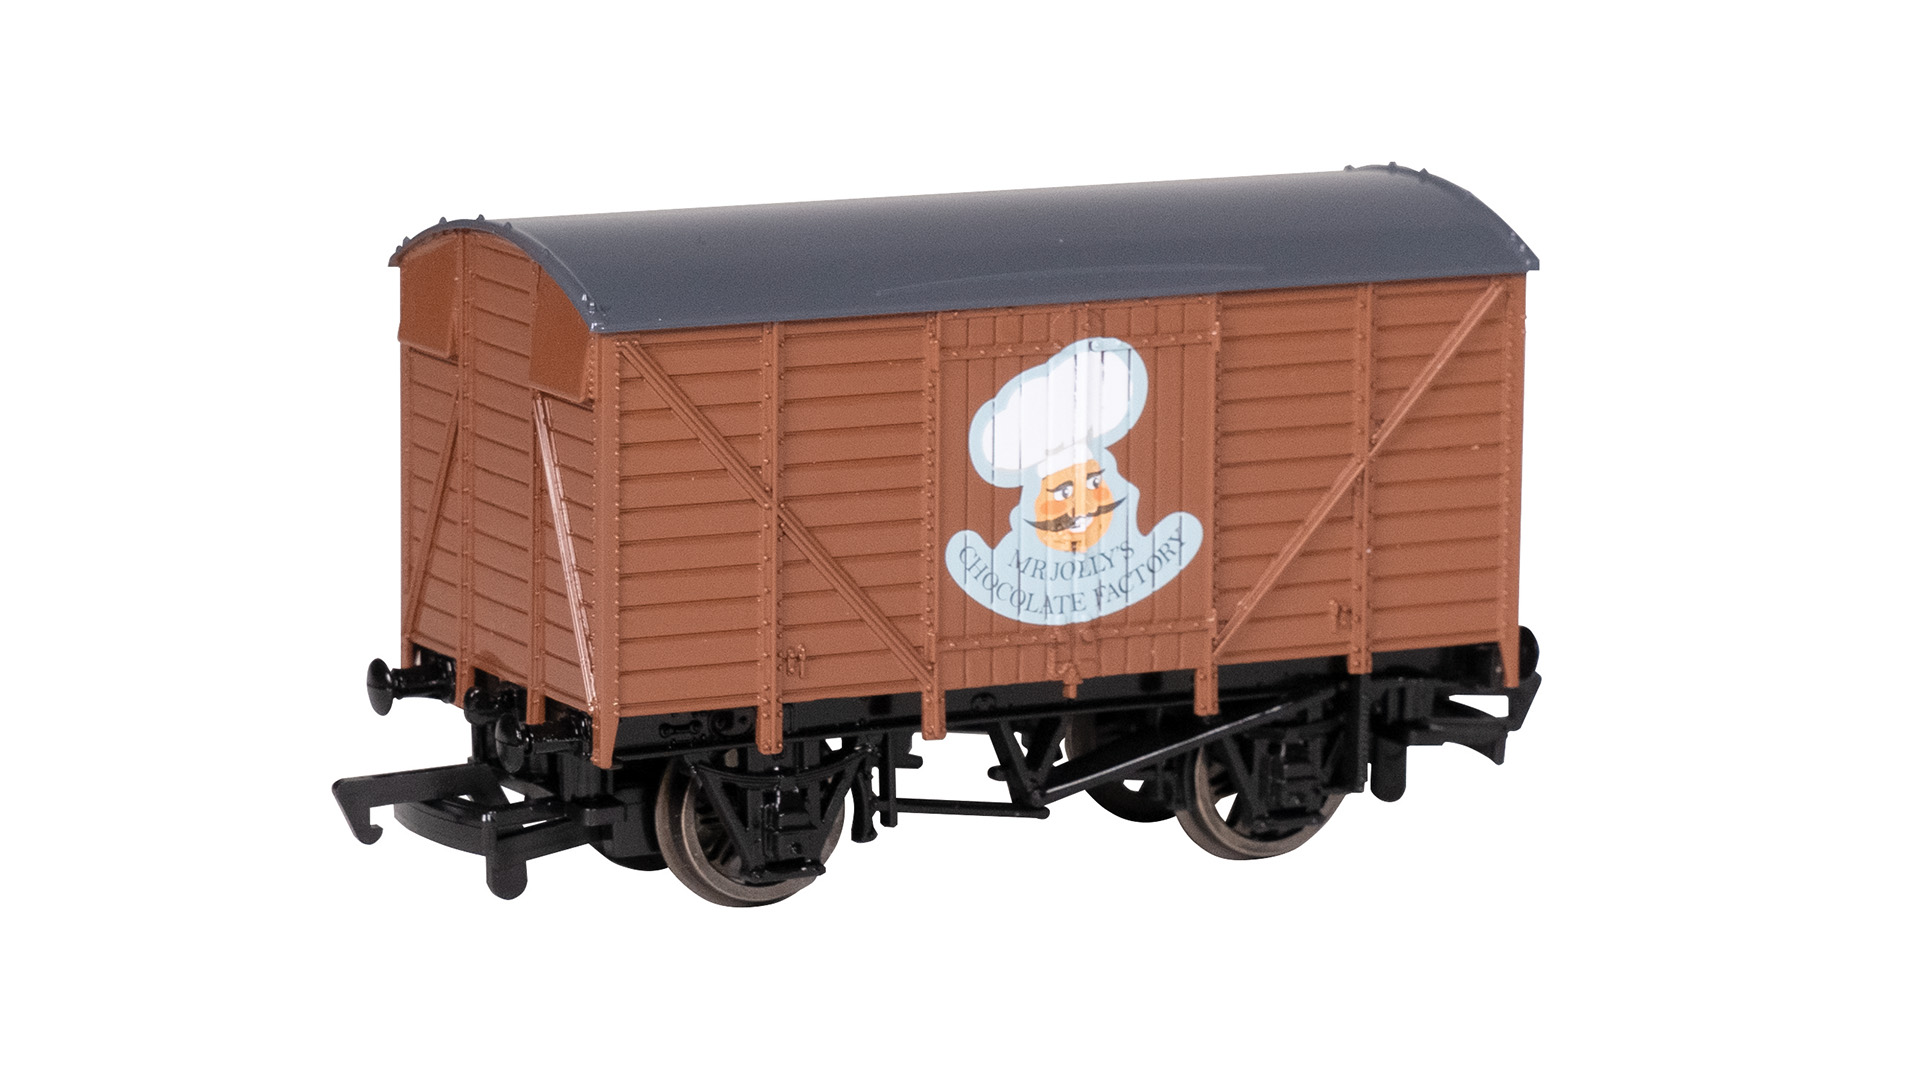 VENTILATED VAN - MR. JOLLY'S CHOCOLATE FACTORY (HO SCALE)